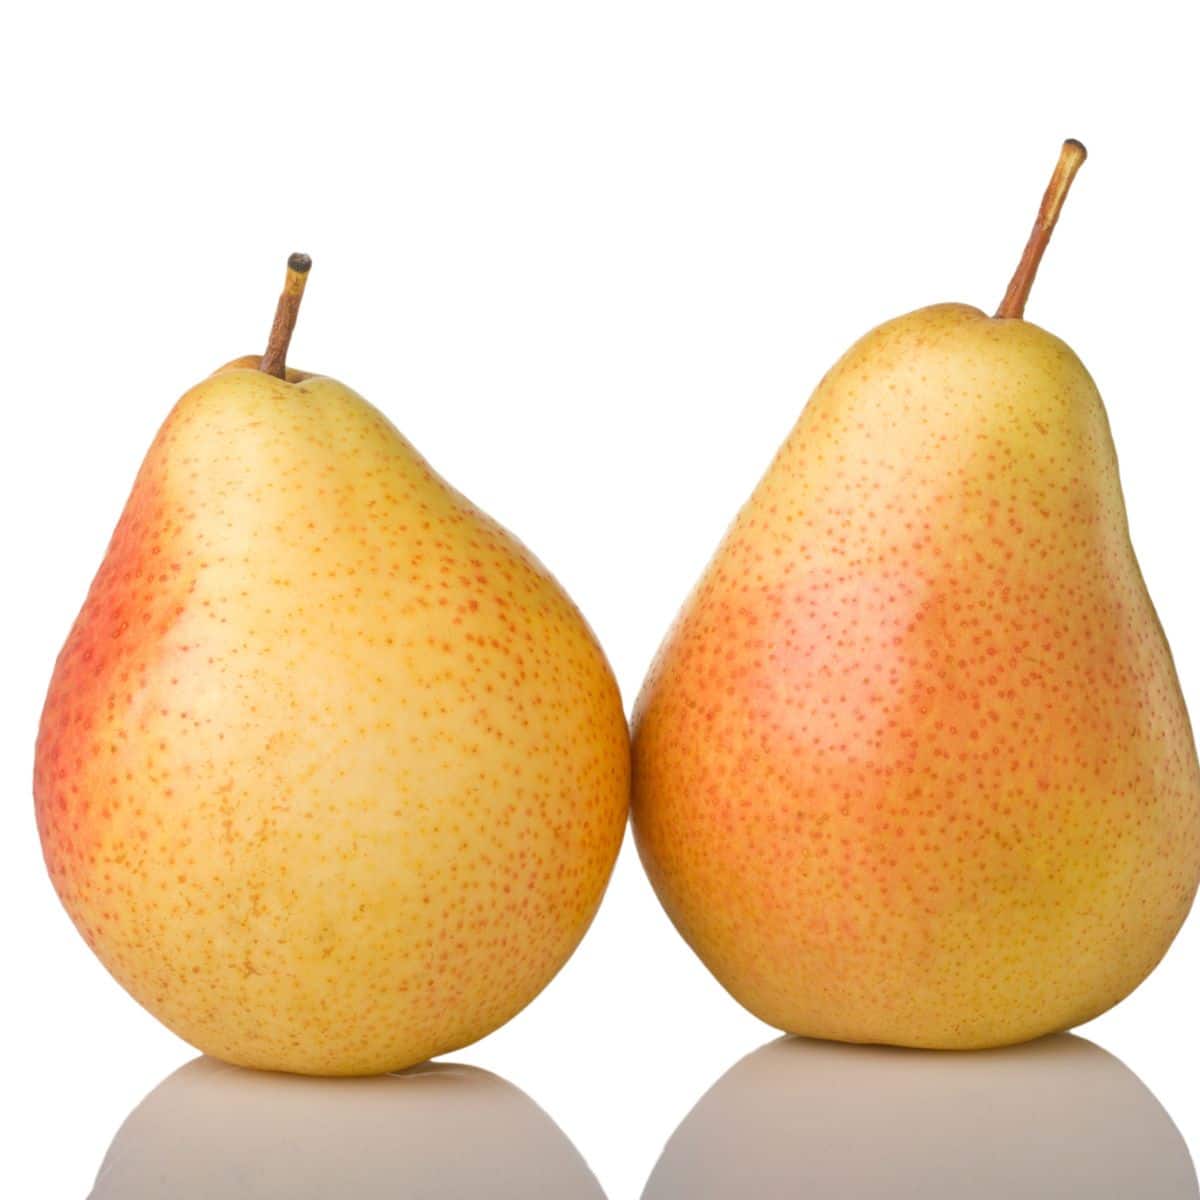 Sunrise pears on a white background.